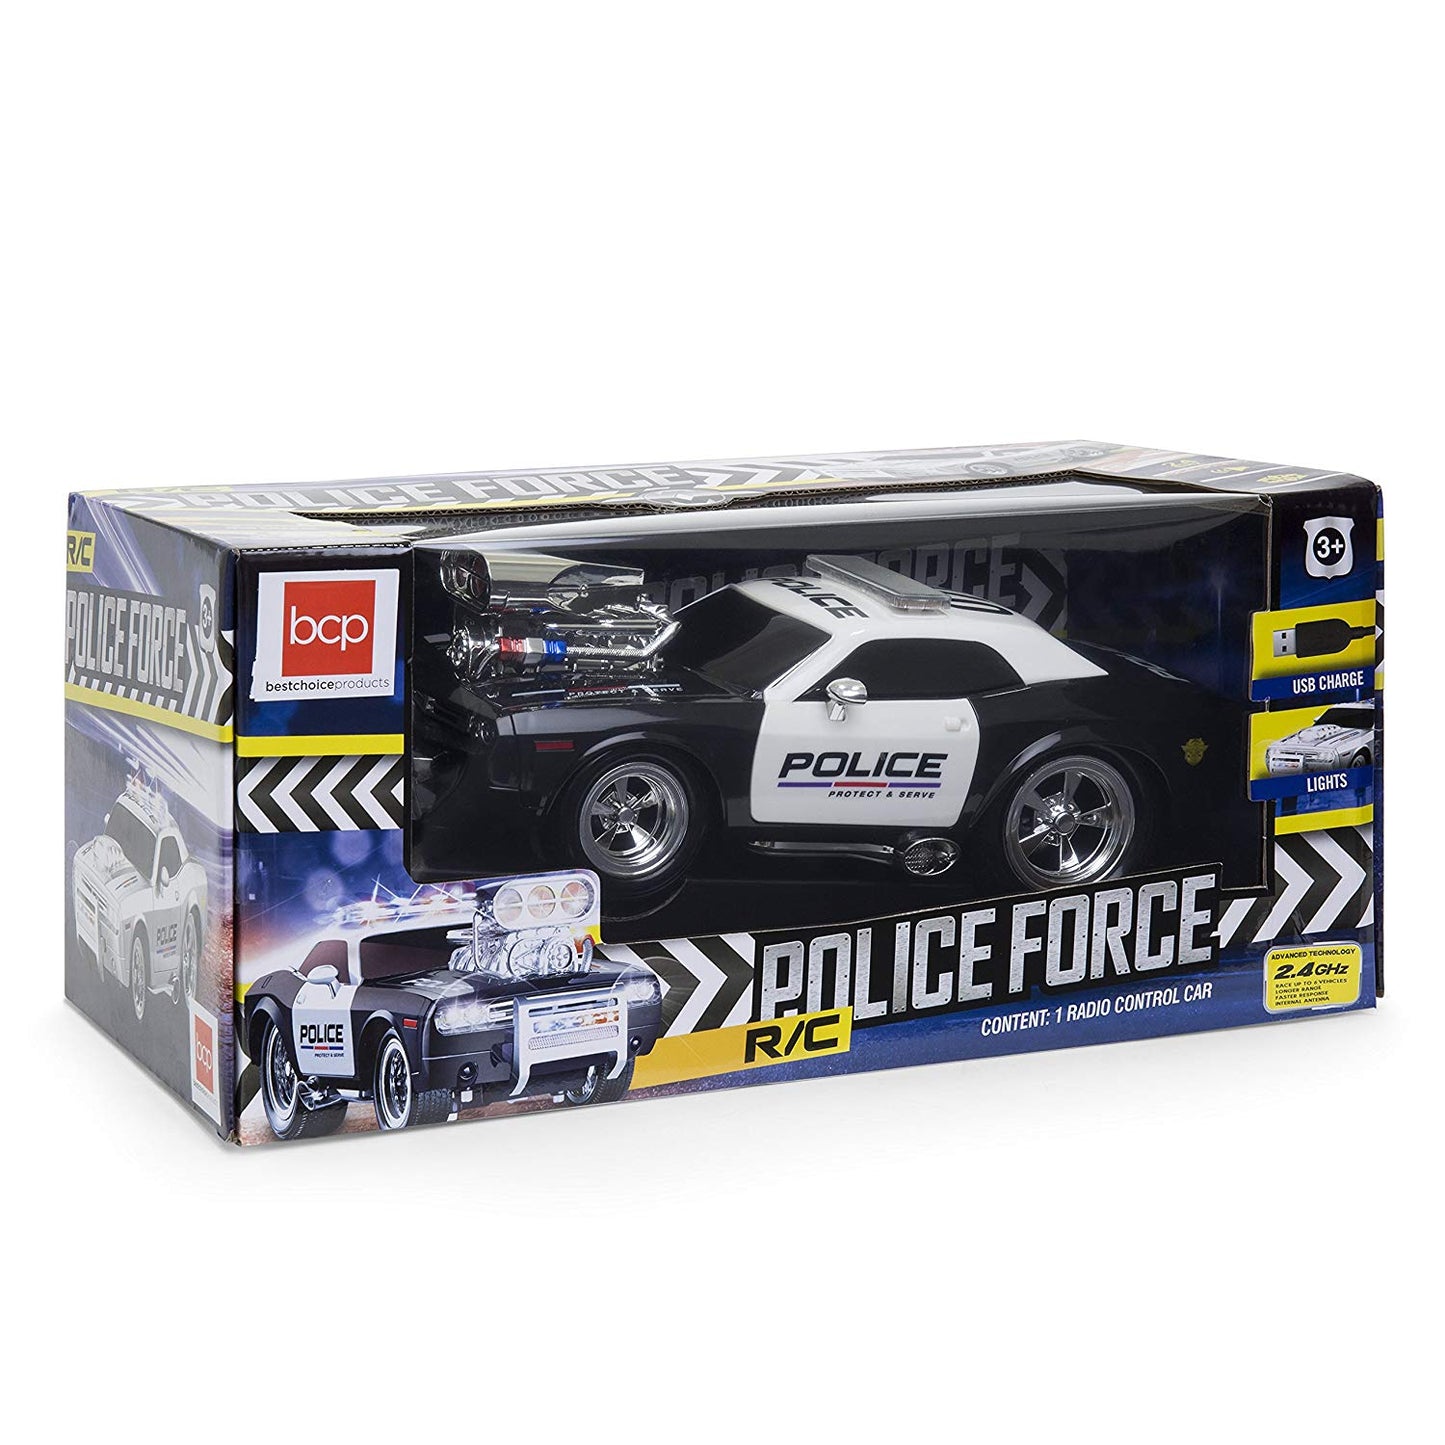 2.4GHz Remote Control Police Car w/ Lights, Rechargeable Batteries, USB Cable - Black